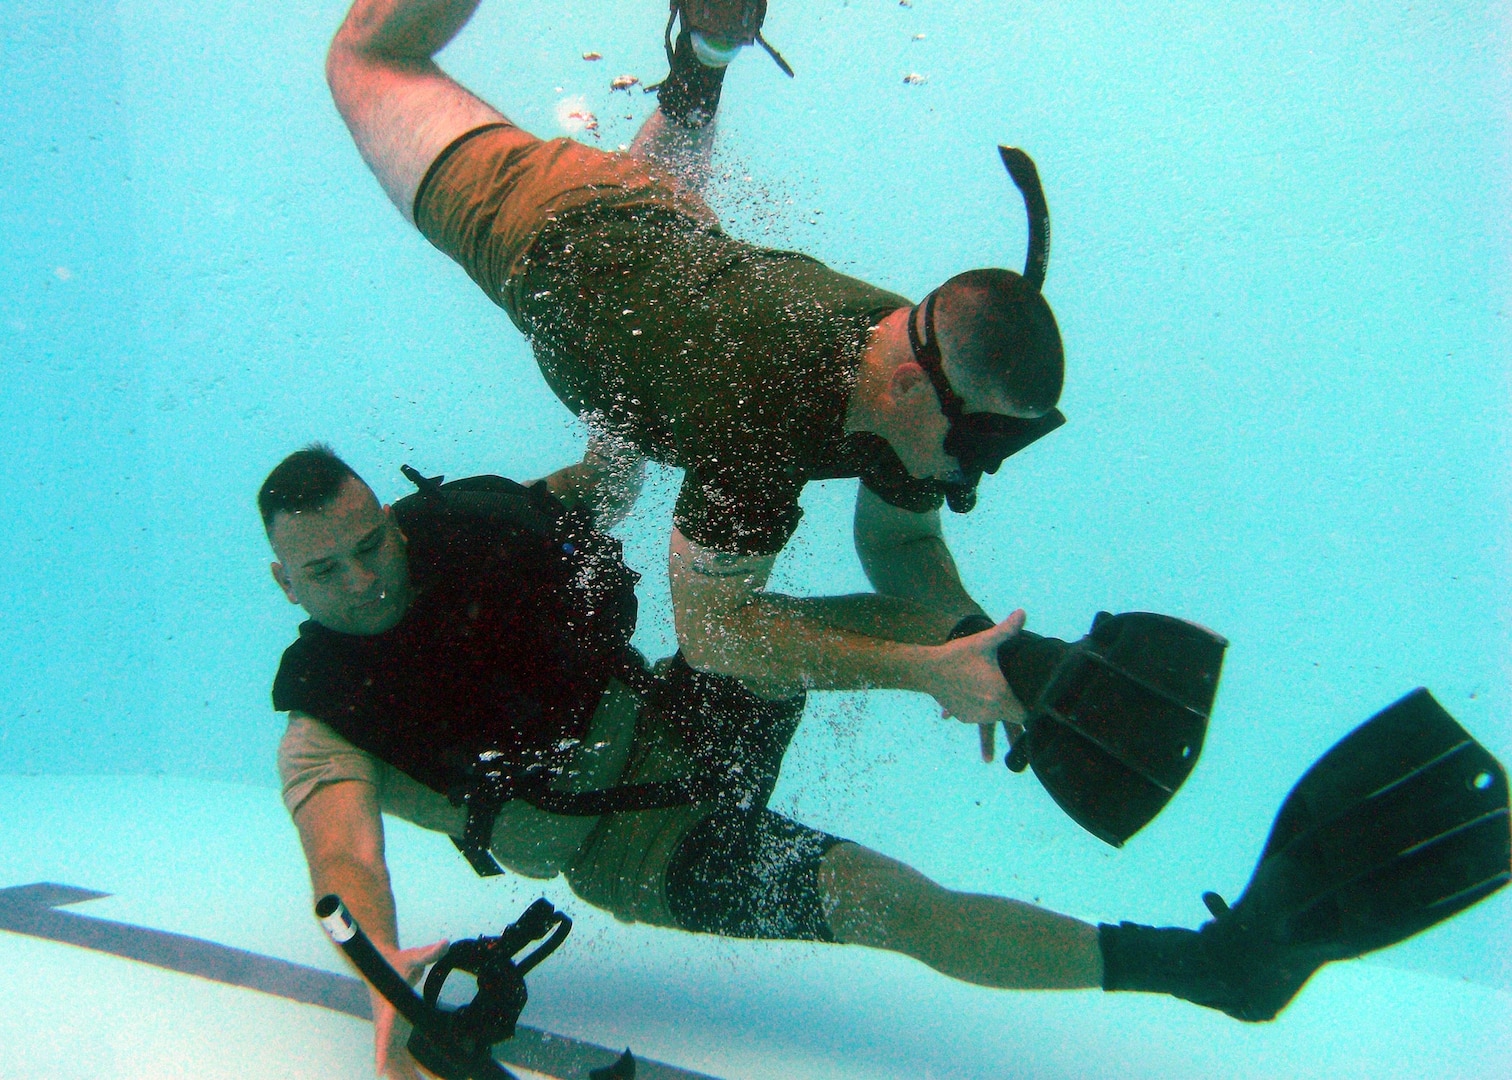 Experienced salvage diver Sgt. Lance Little (top) "attacks" Sgt. Roel Ramos during repeated pool "hits" by taking off his mask and removing his swimming fins. Prospective dive school students must overcome panic and perform corrective actions with one precious breath of air.